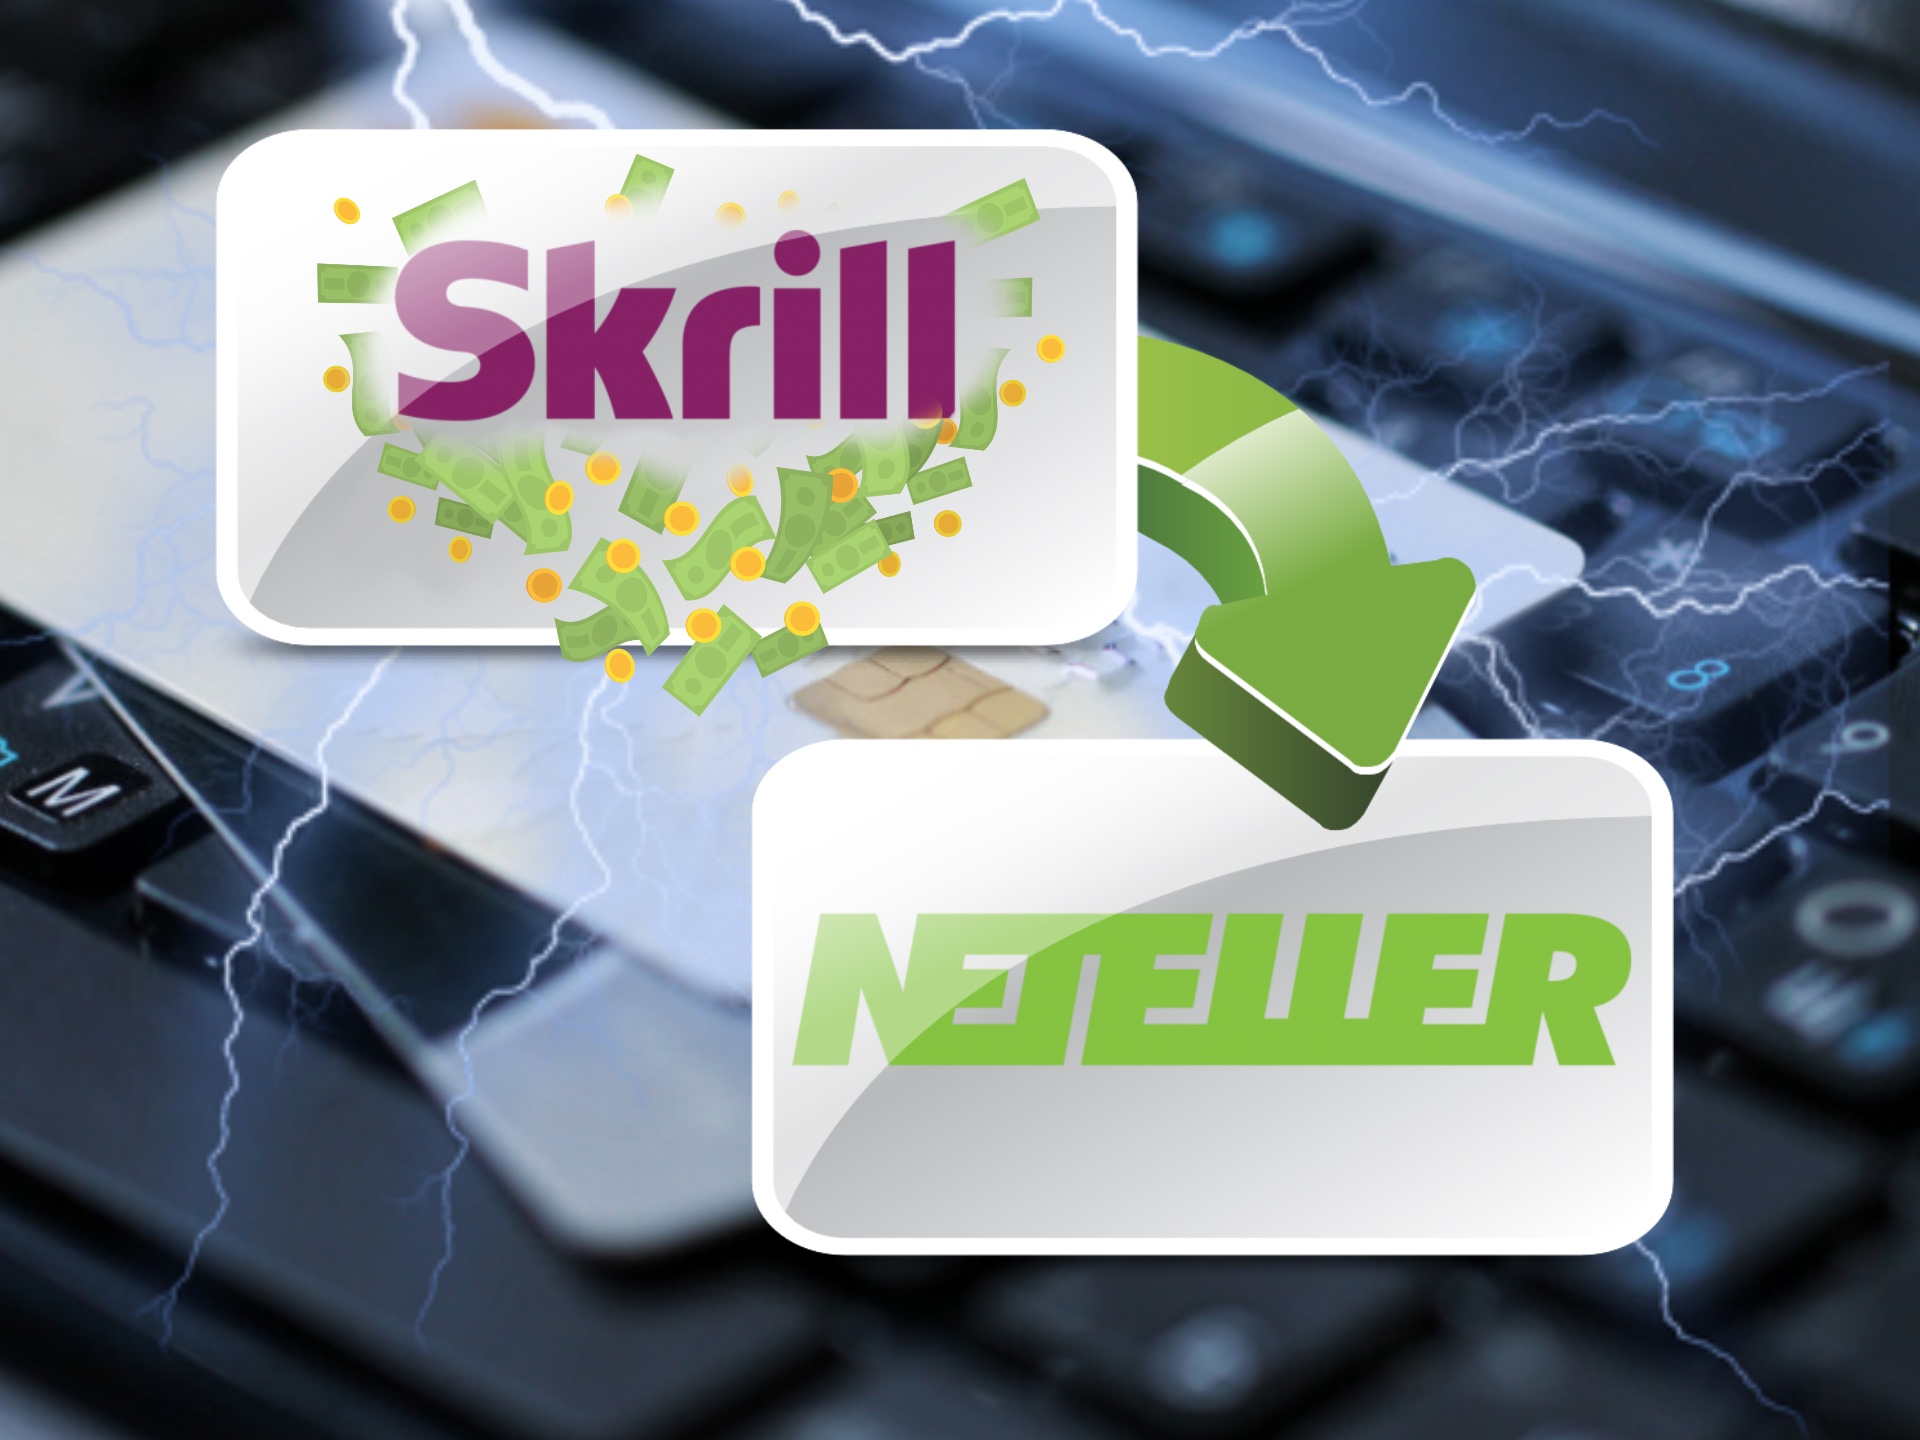 Skrill-to-Neteller withdrawal is very convenient and almos instant.